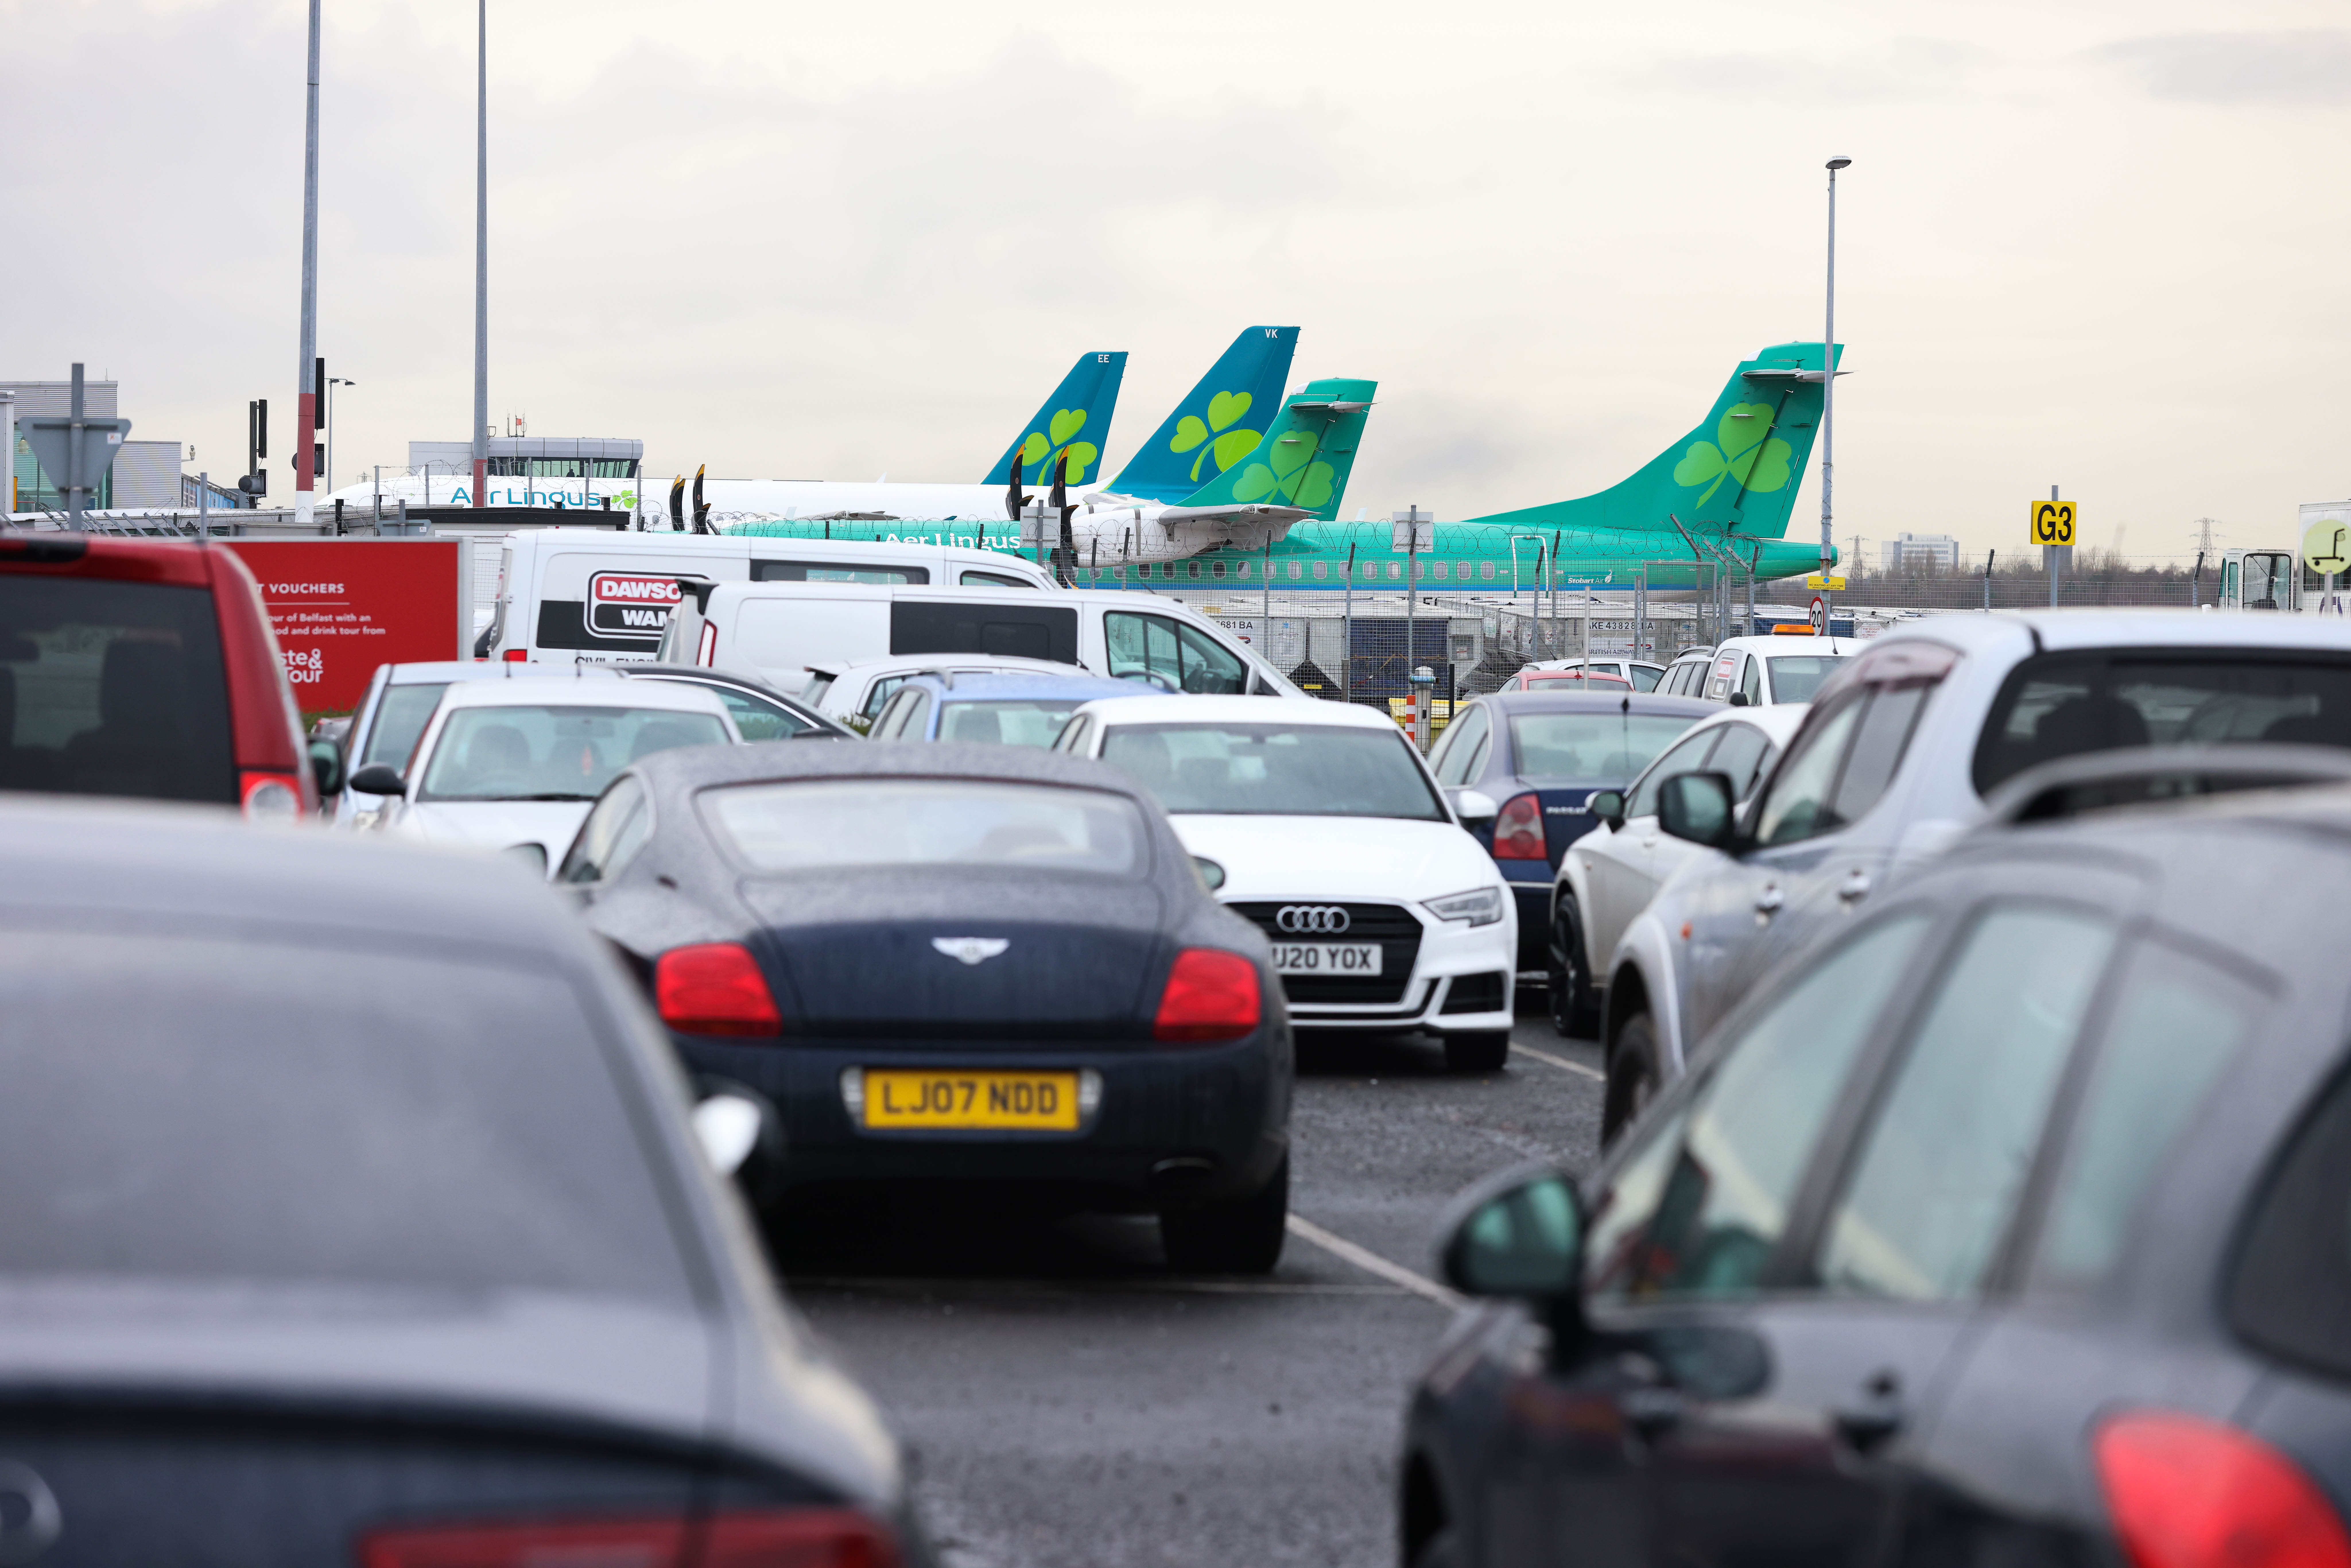 Premier Car Park - Belfast City Airport, 1-2 minute walk from the terminal